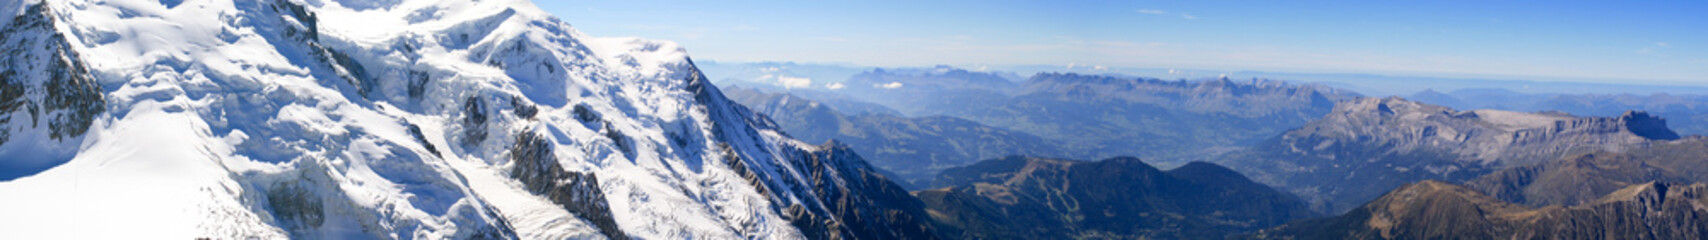 Panoramic view from Aiguille du midi, Chamonix, France of the Al